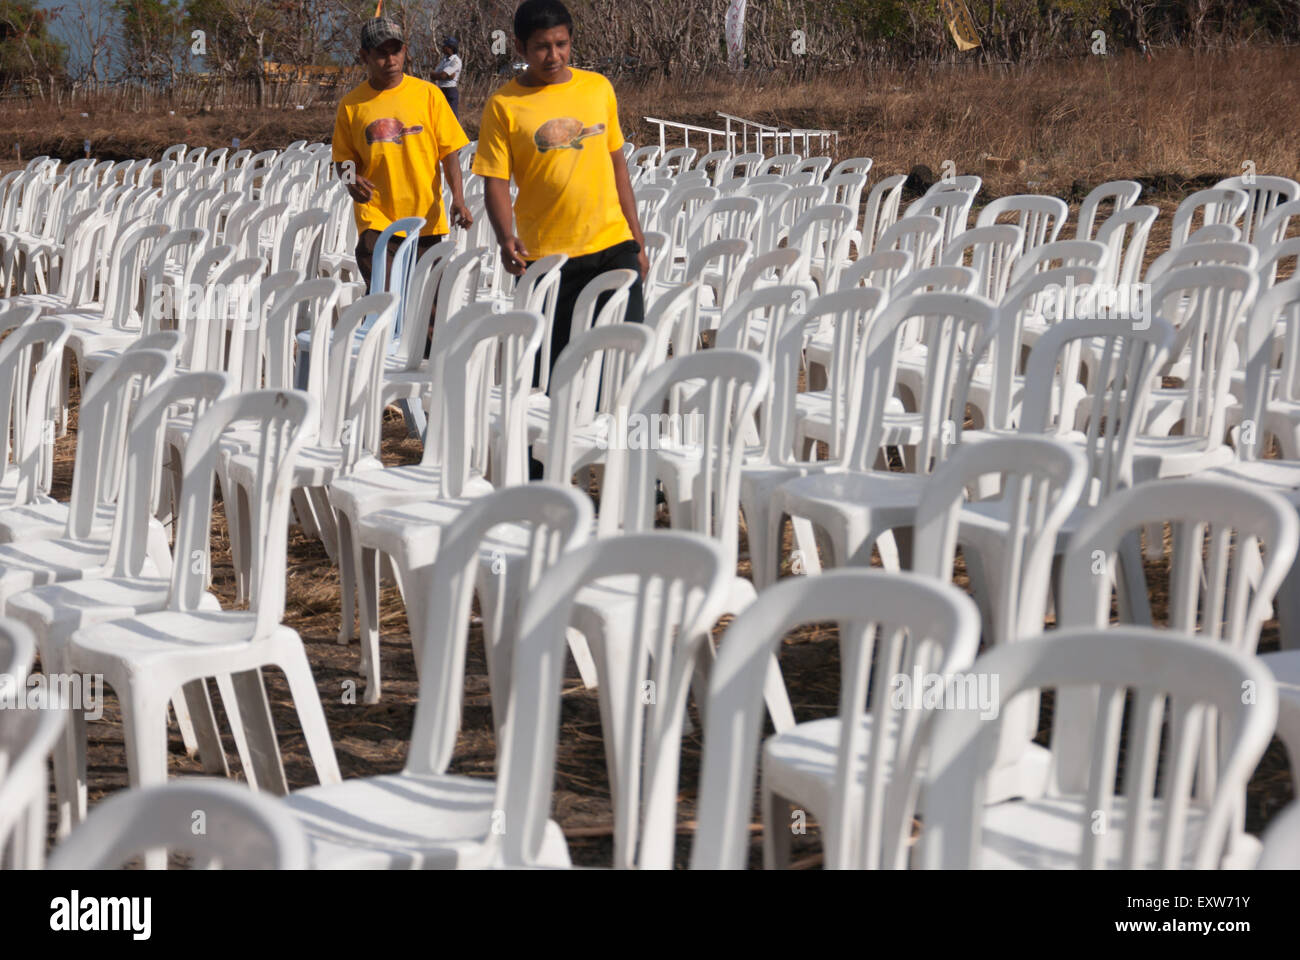 Men wearing snake-necked turtle shirts walking on aisle between rows of white plastic chairs. Stock Photo